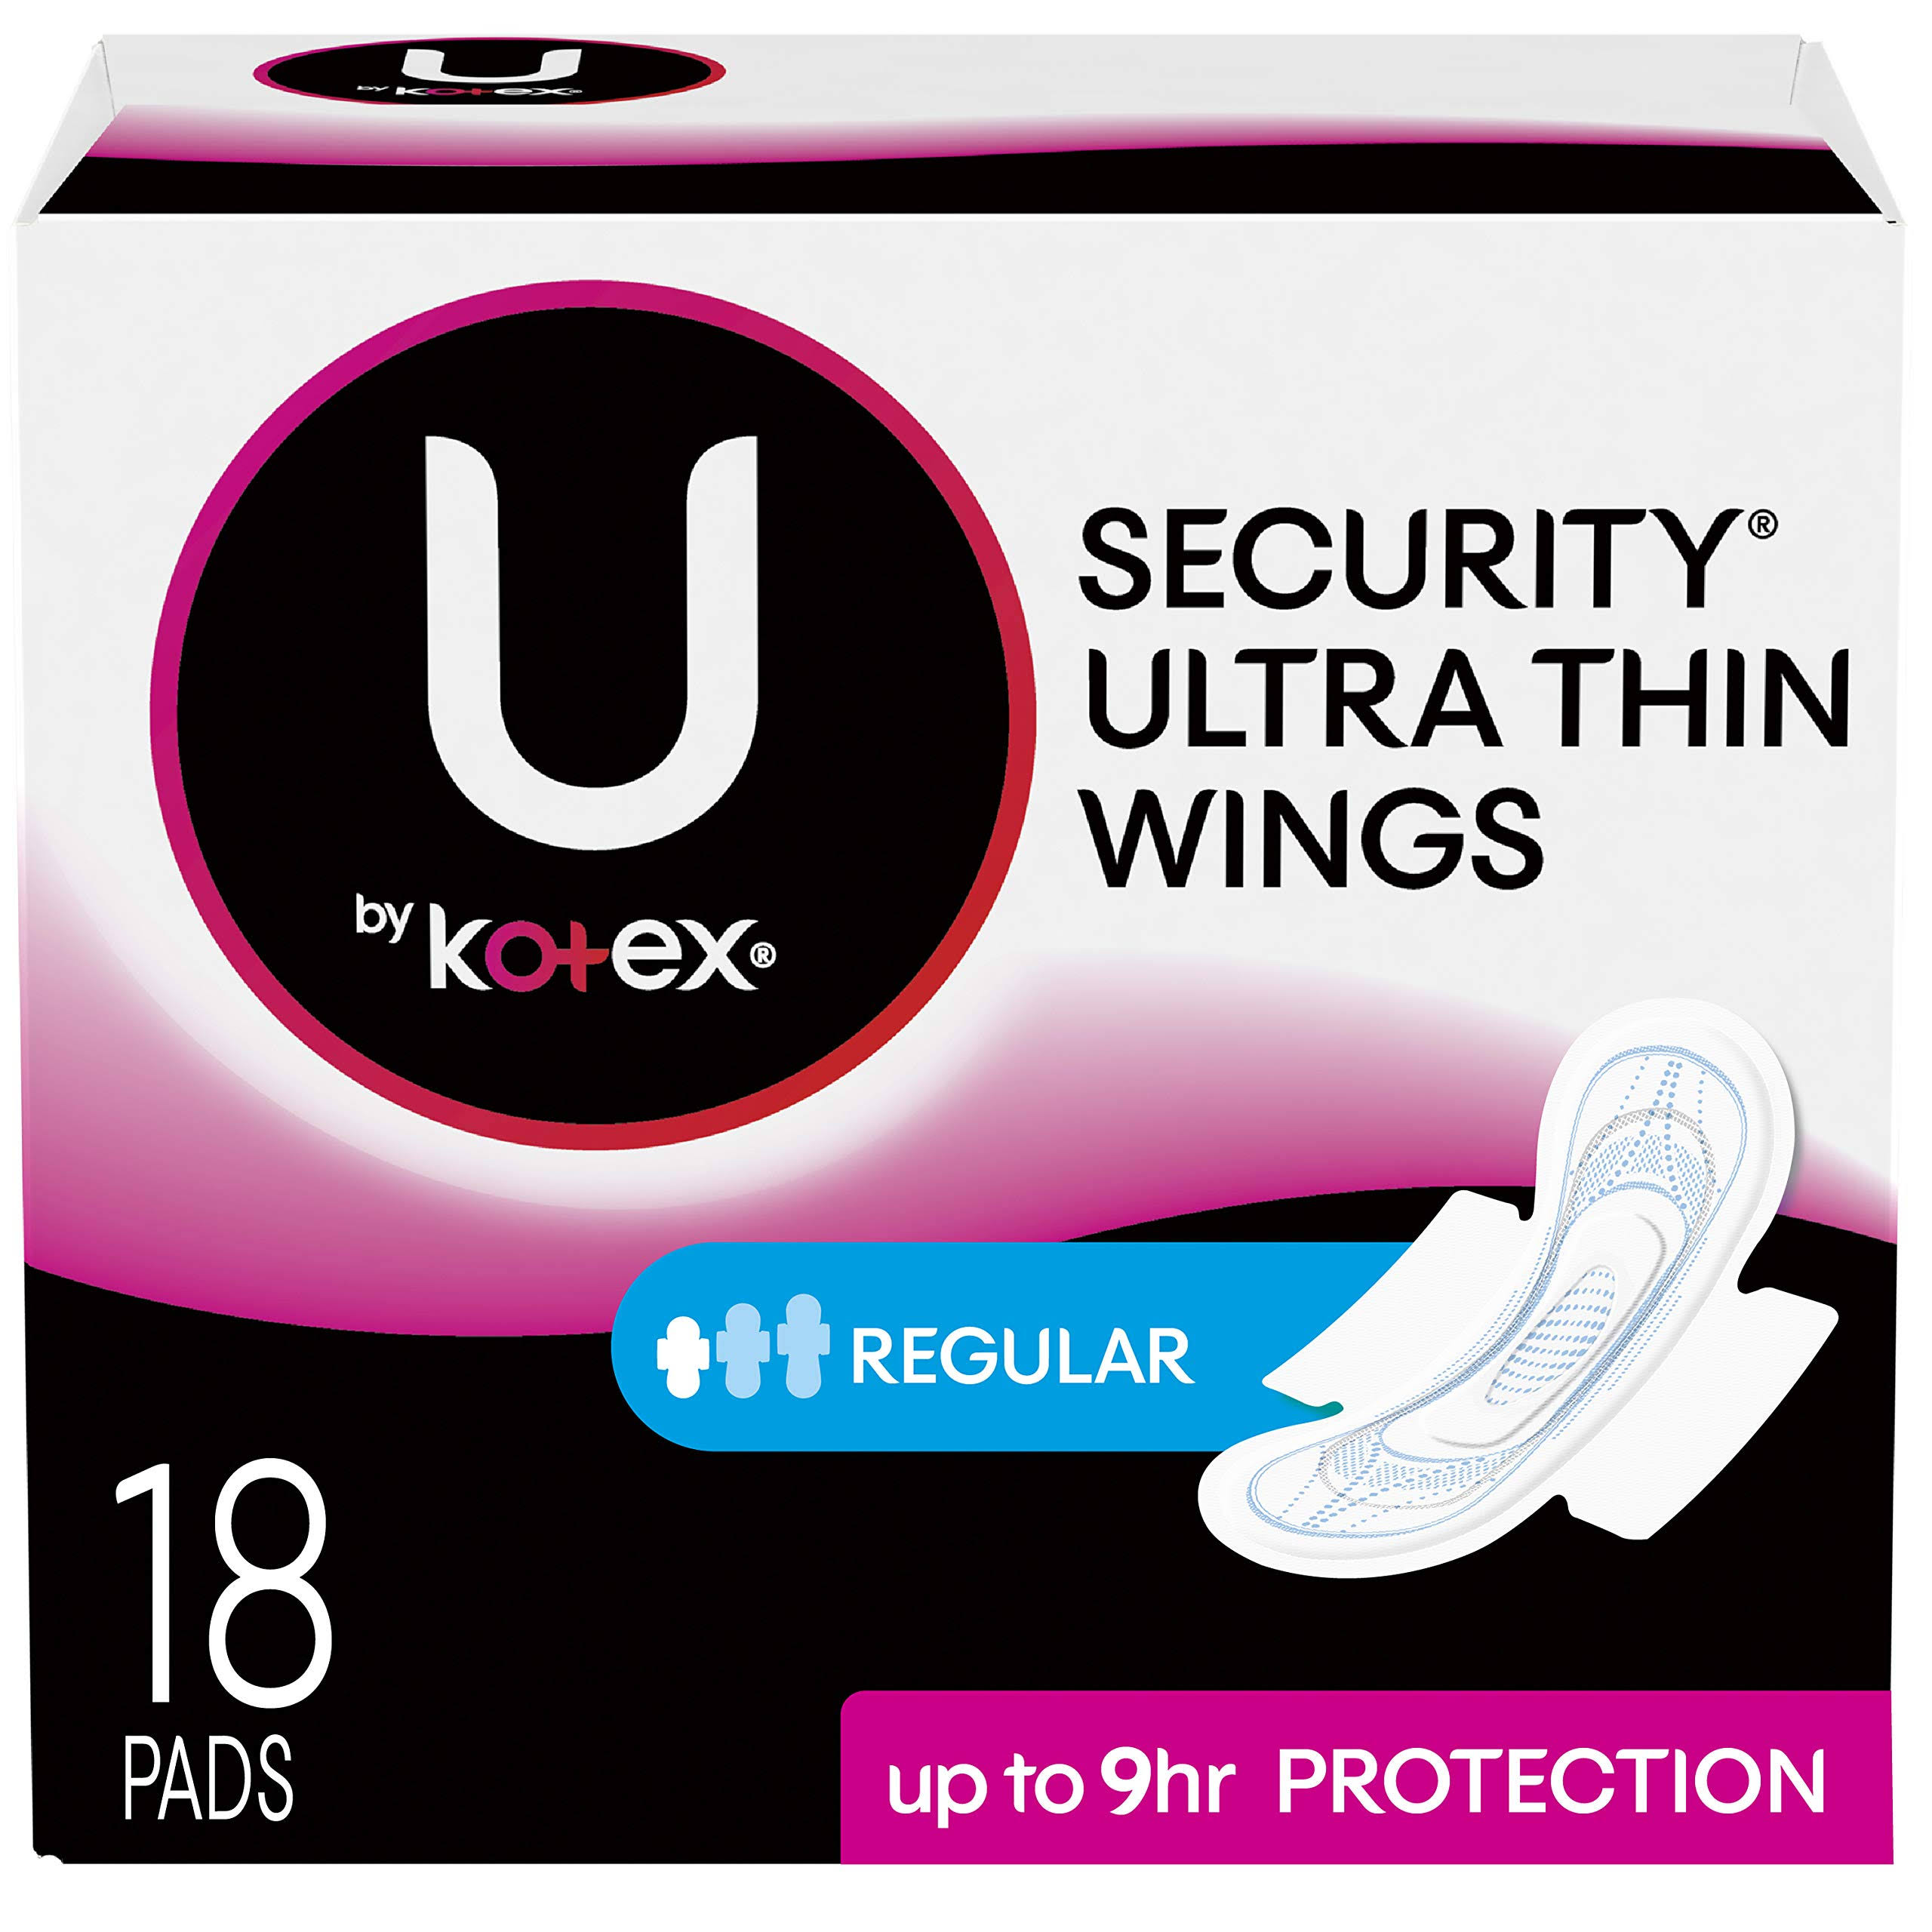 U By Kotex Security Ultra Thin Pads with Wings - Regular, 18ct, Unscented